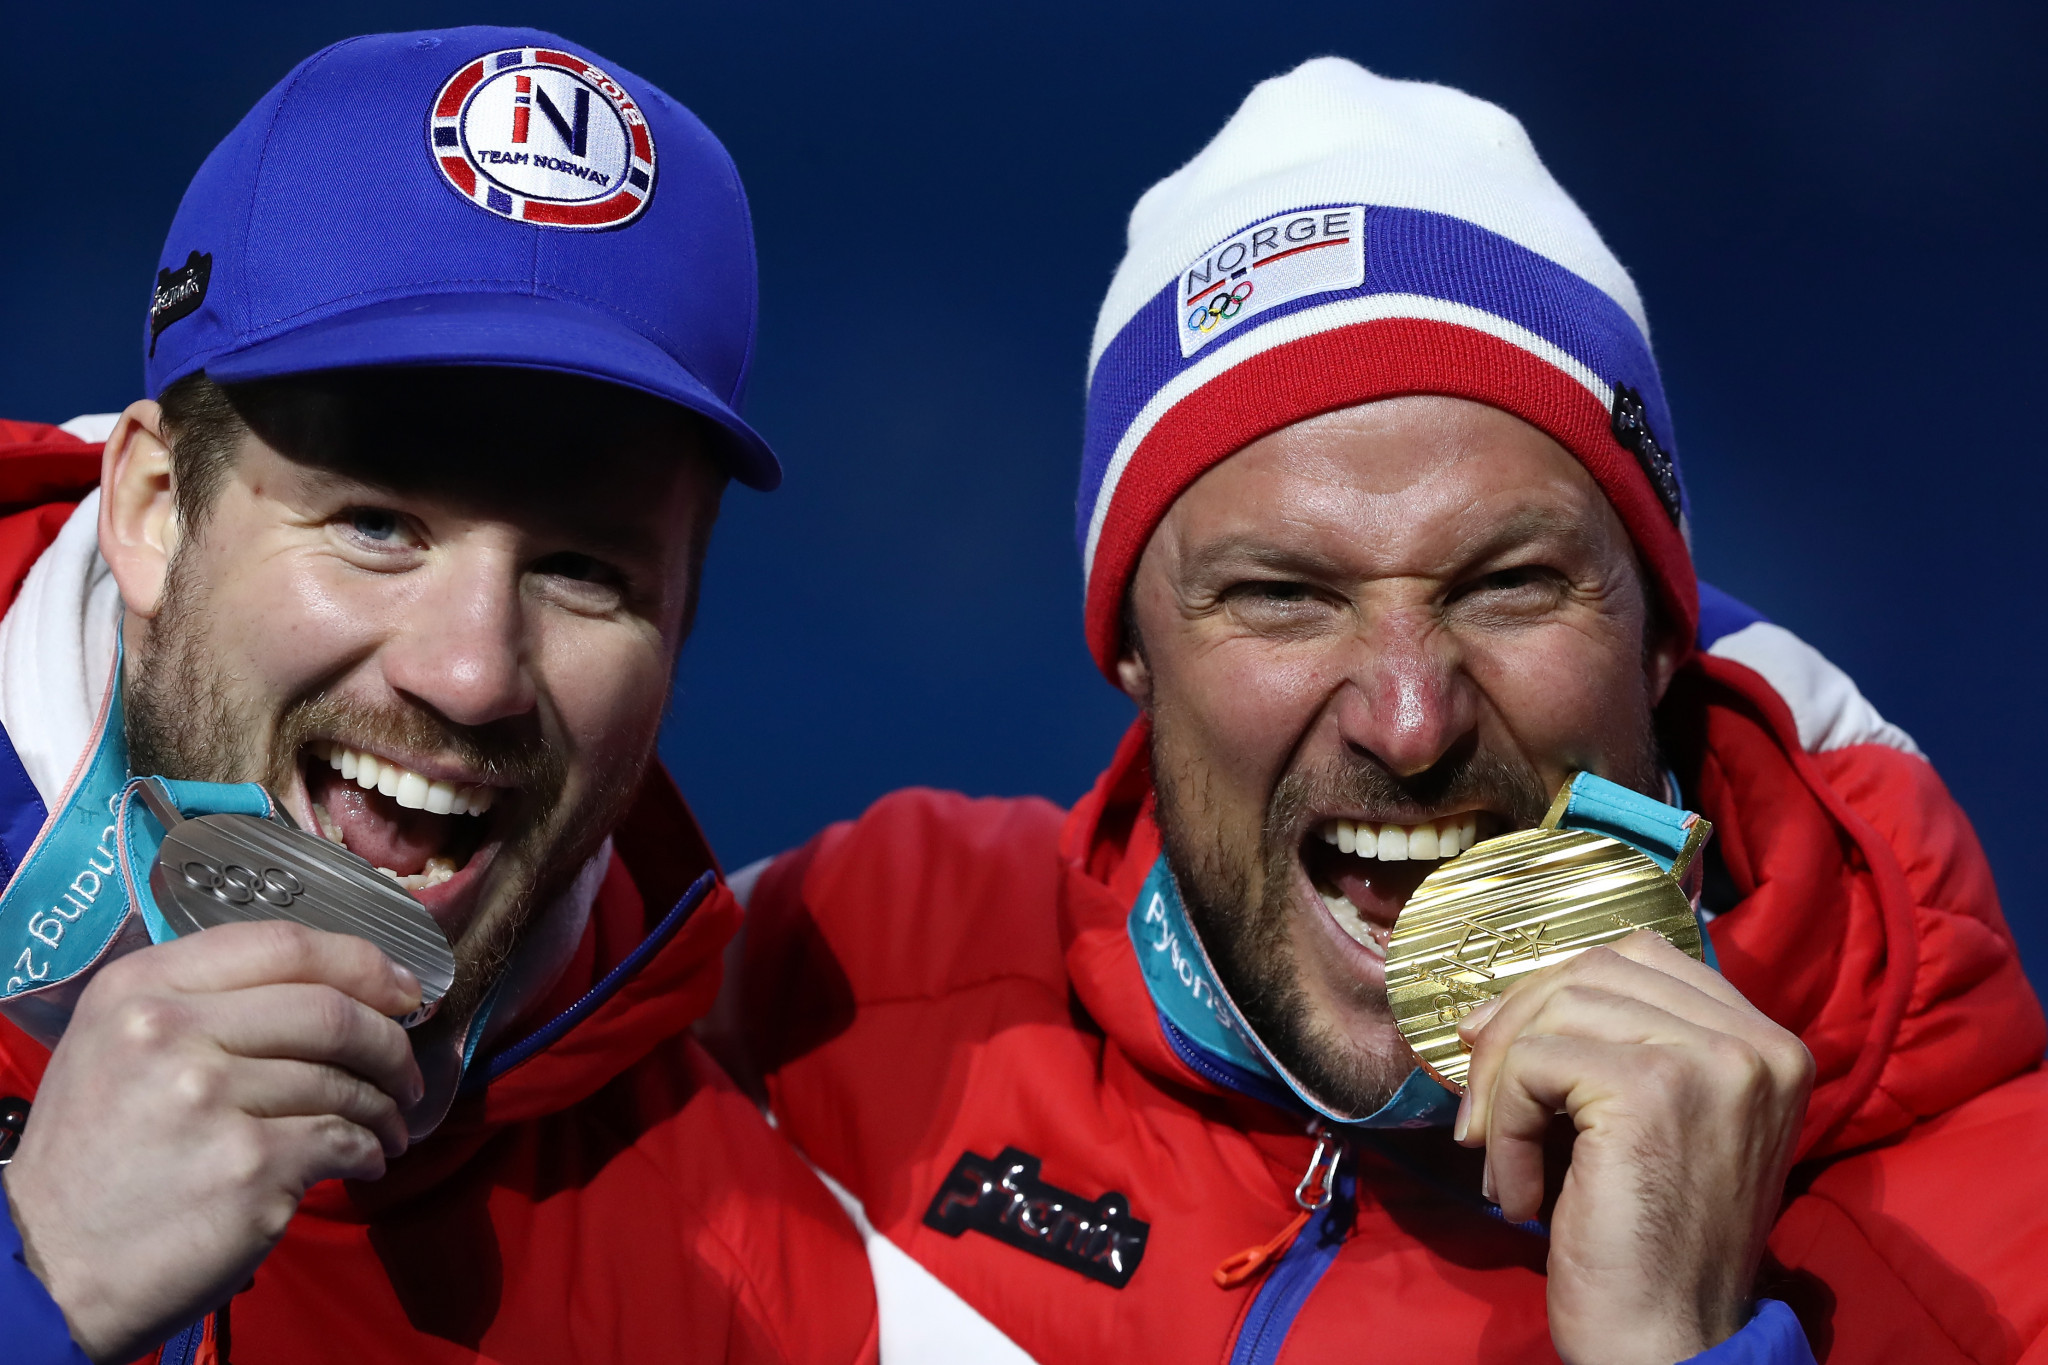 The Norwegian became the oldest Olympic Alpine skiing champion at the age of 35 ©Getty Images